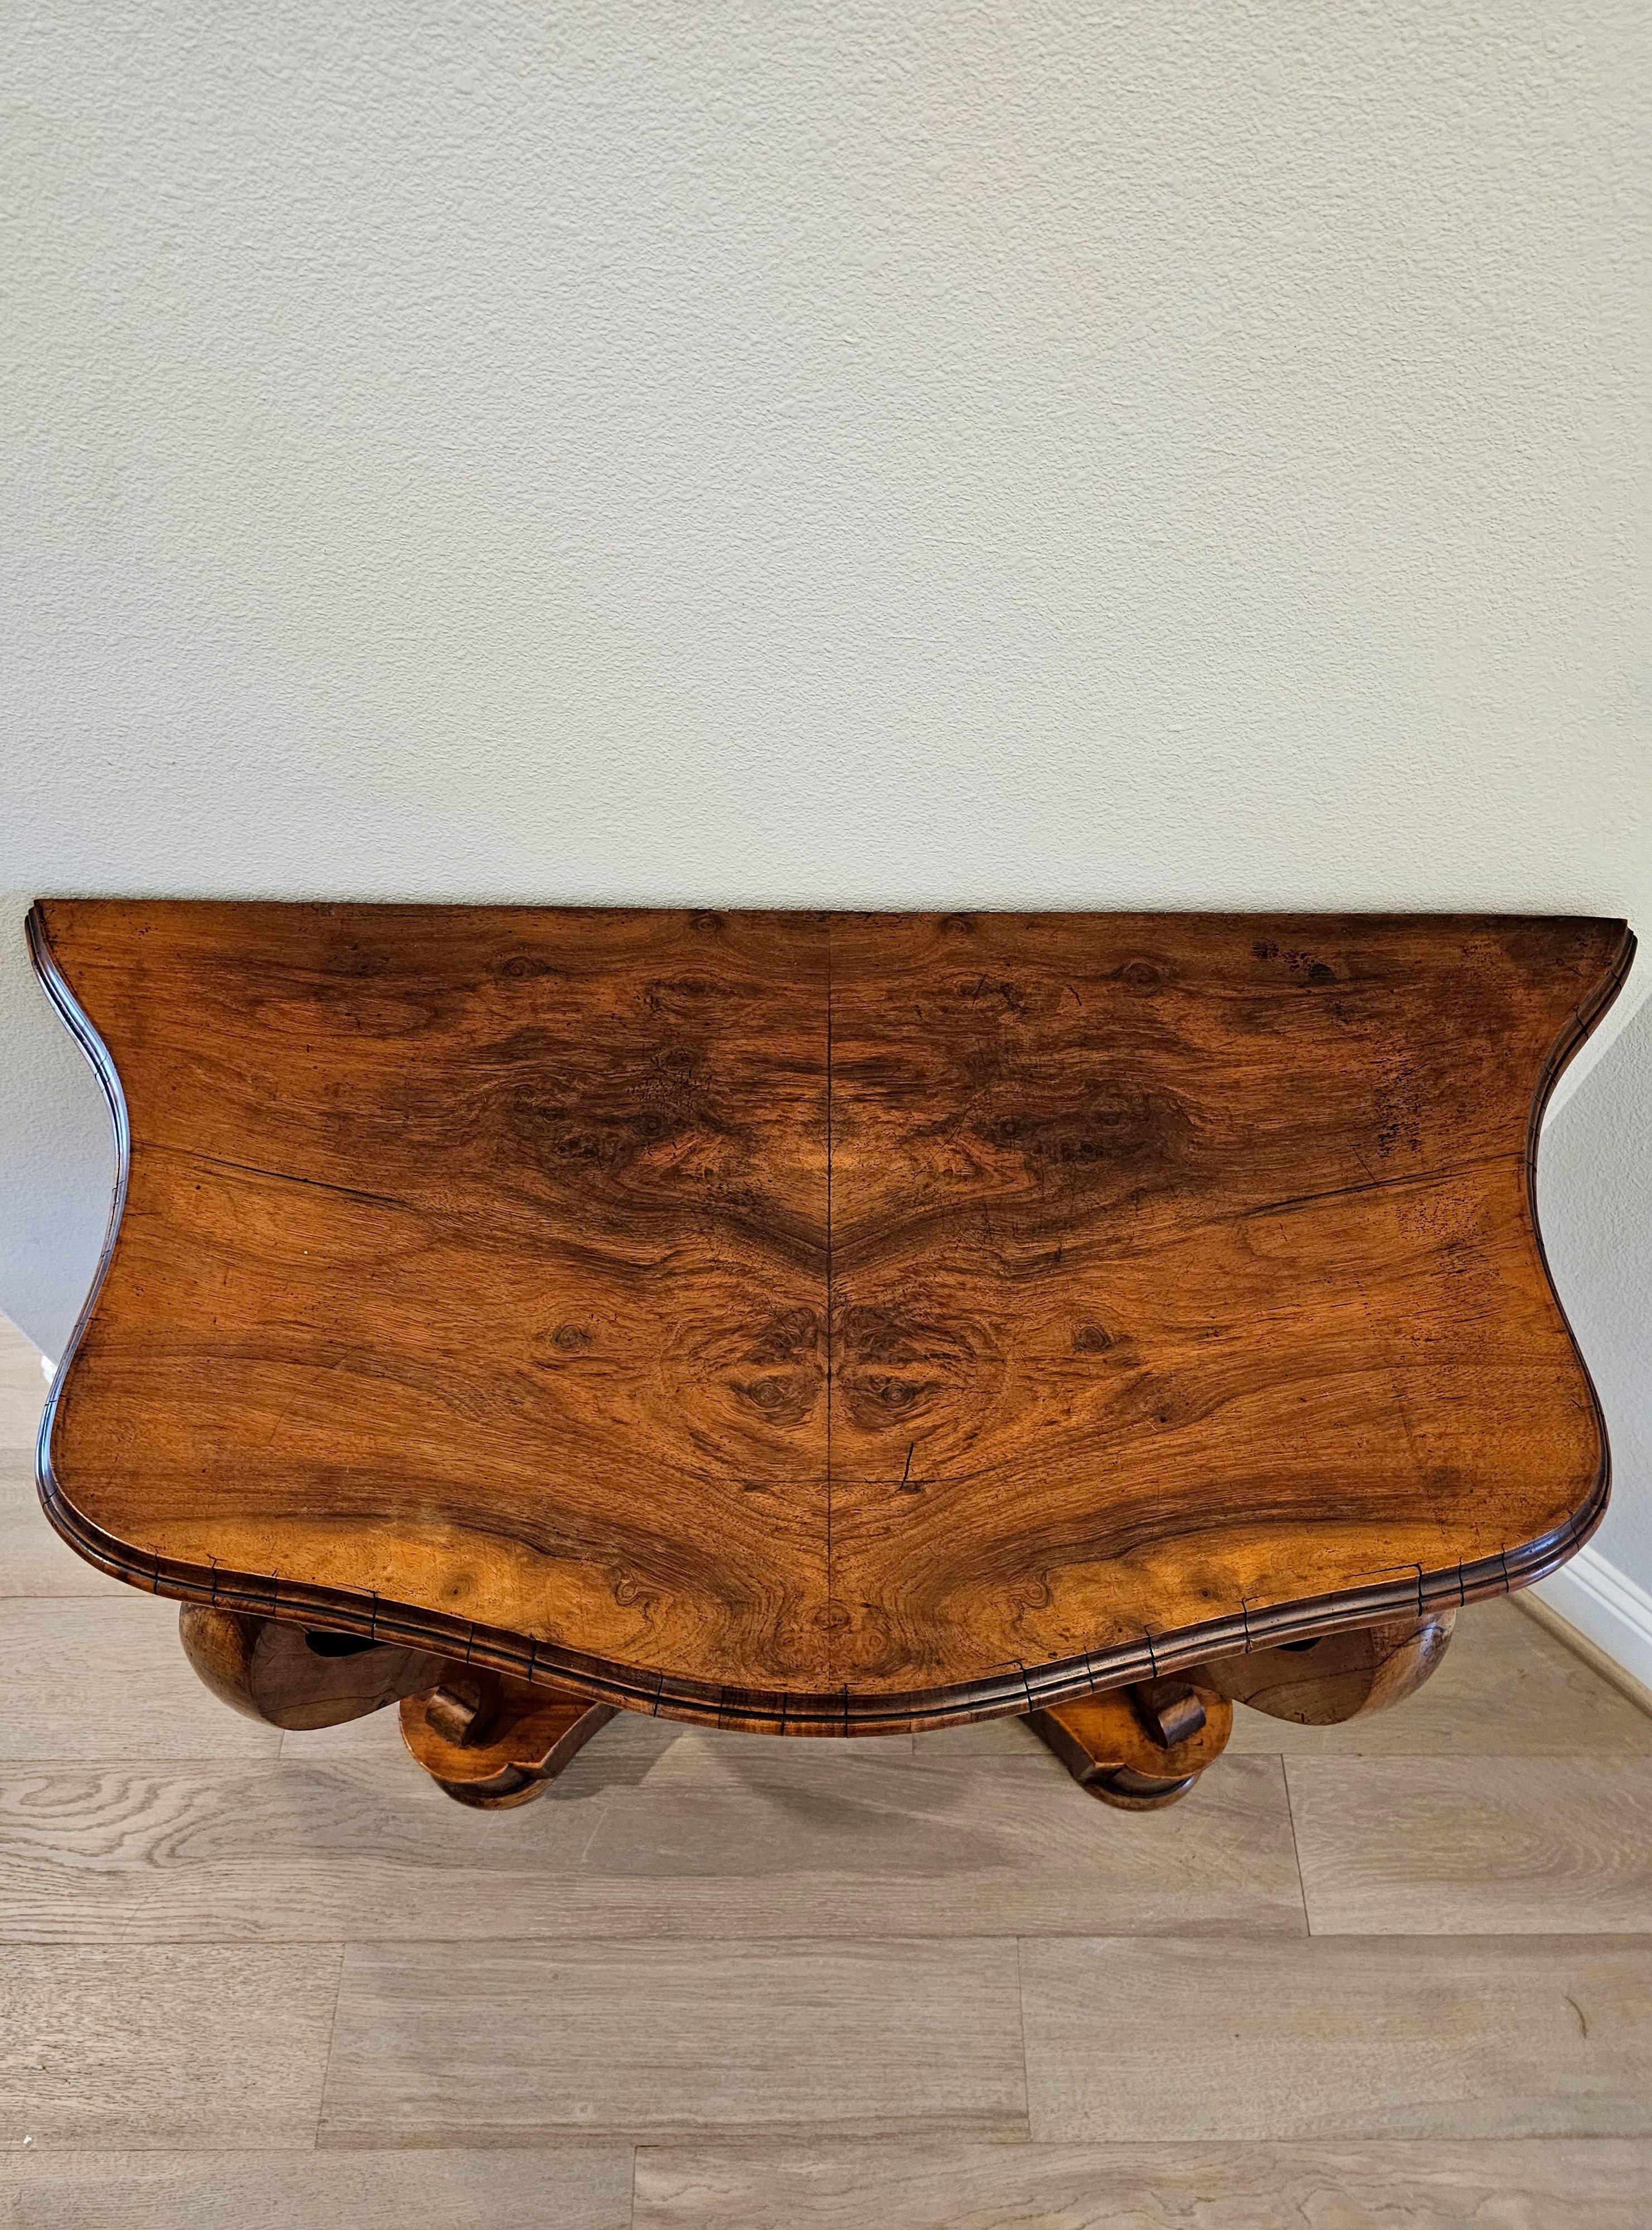 19th Century French Louis Philippe Period Burl Walnut Console Table In Good Condition For Sale In Forney, TX